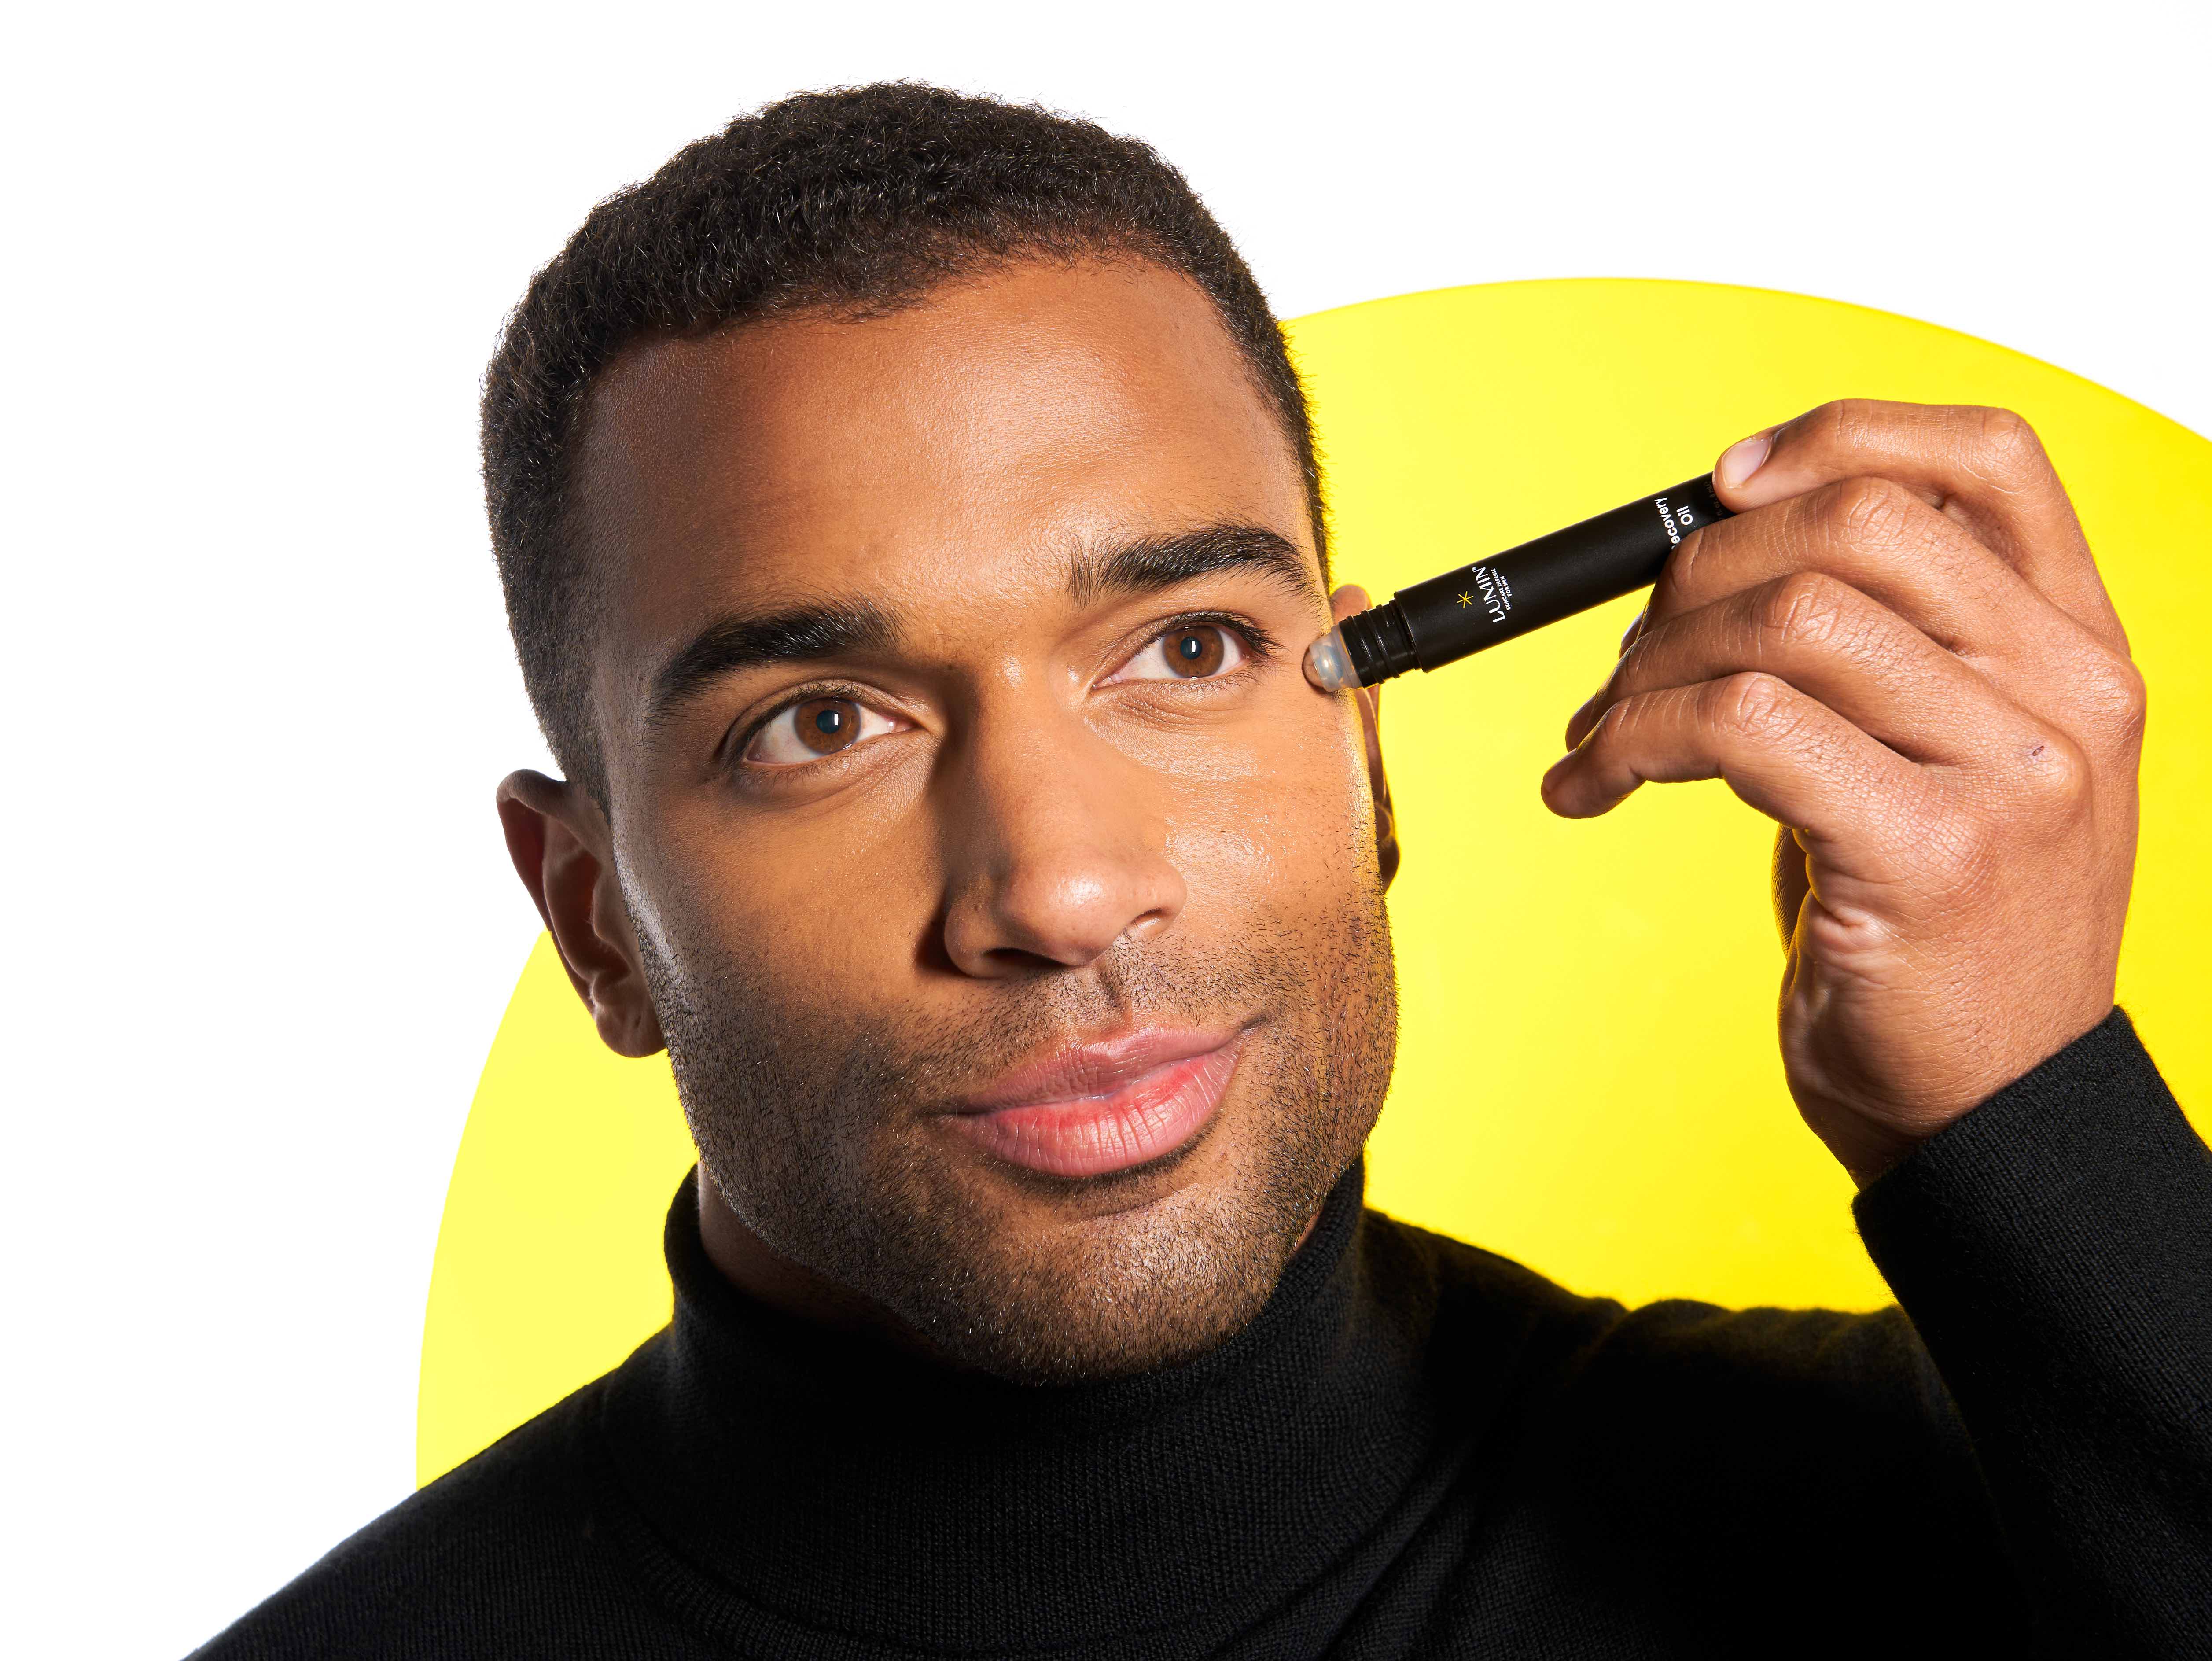 Get ready to redefine your grooming game and unlock the confidence